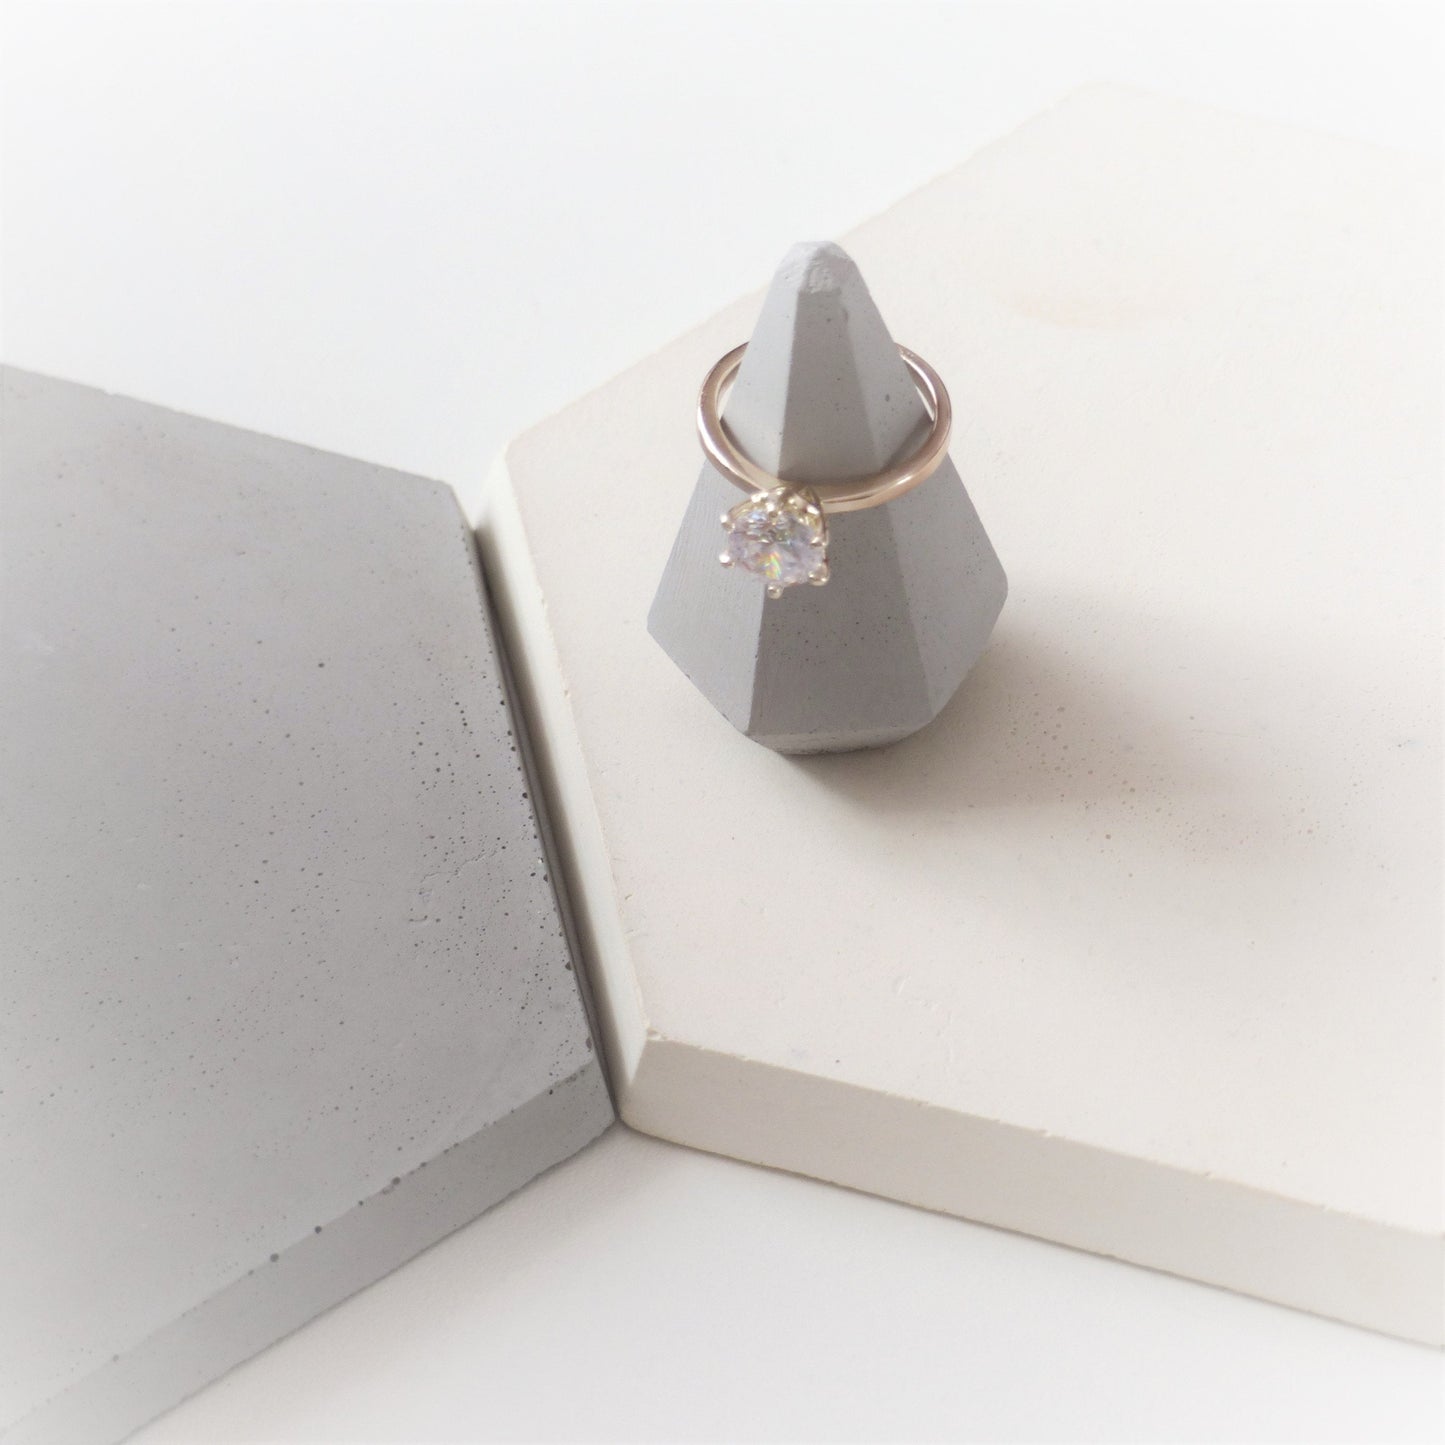 Gray ring holder in the shape of a diamond